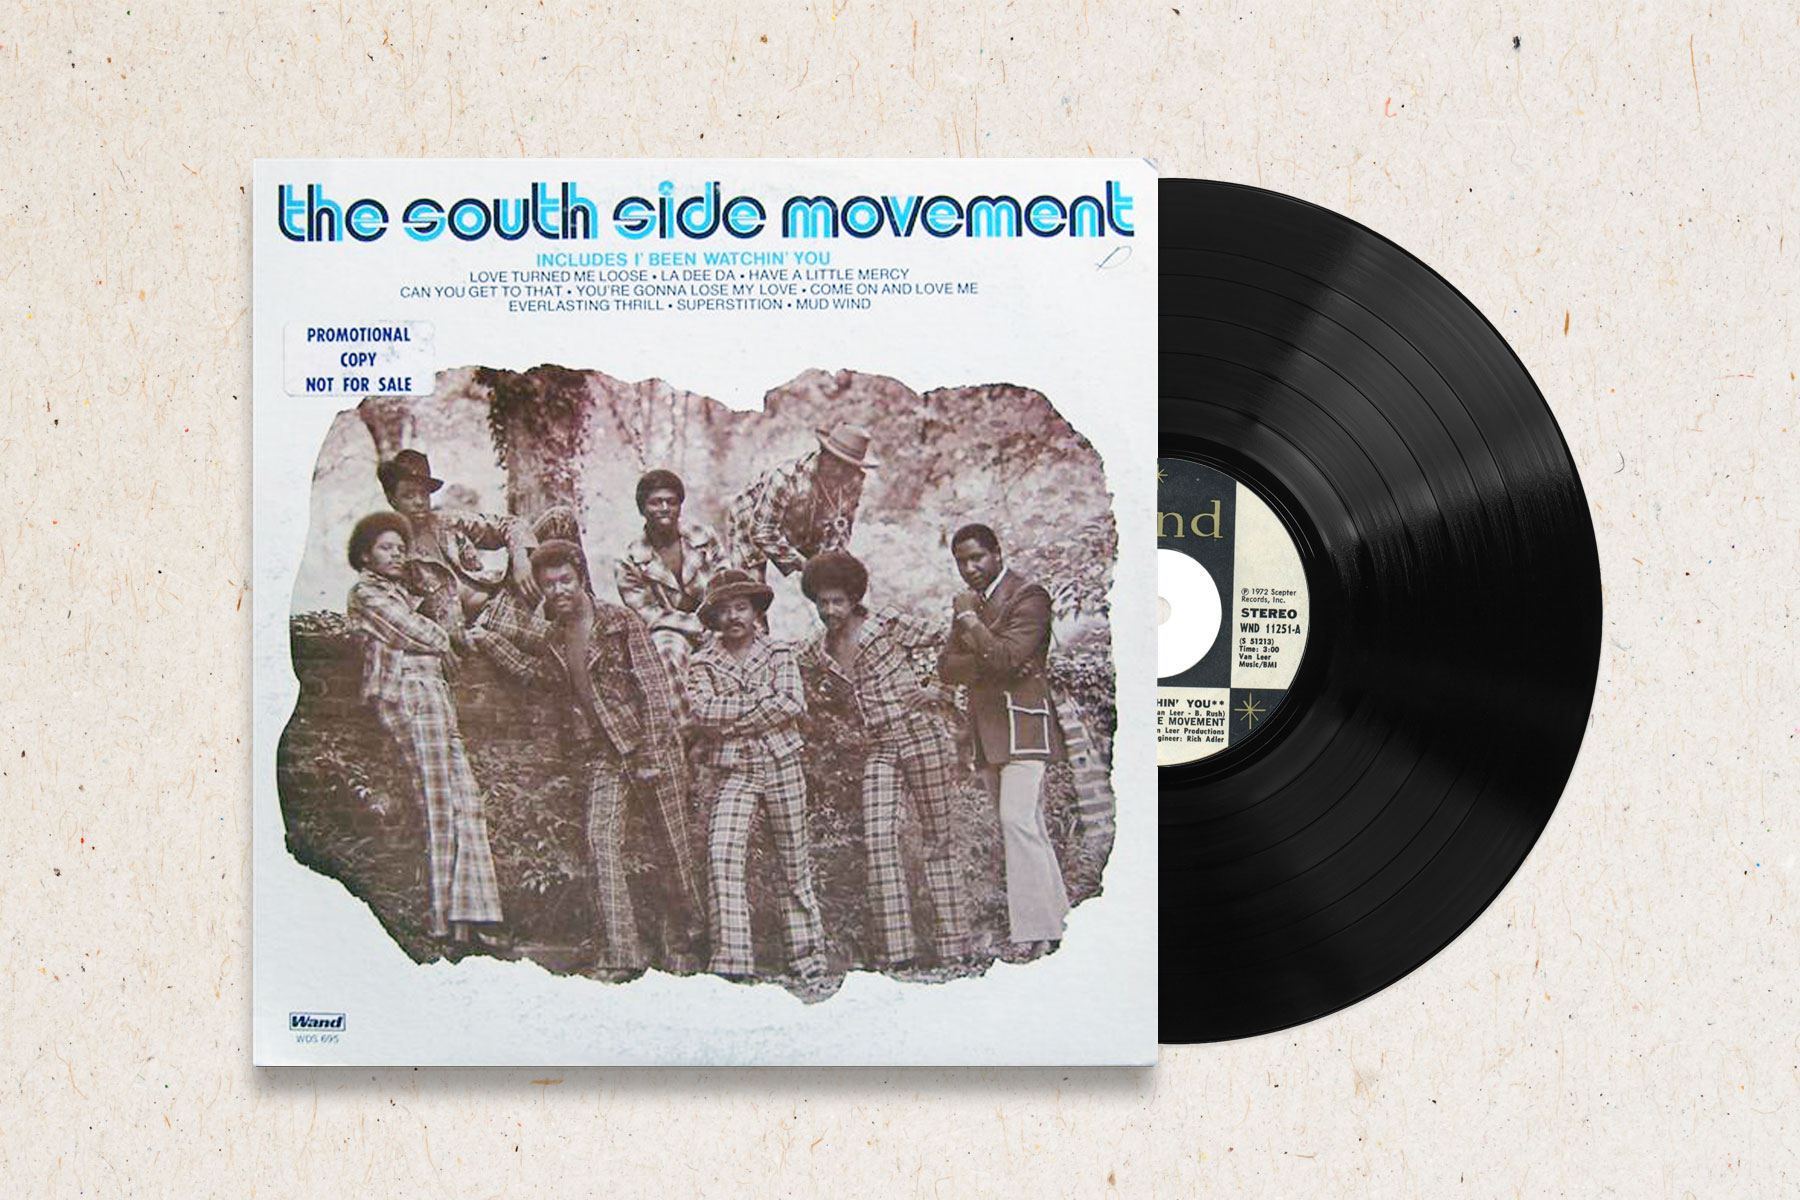 An image of The South Side Movement's album cover.